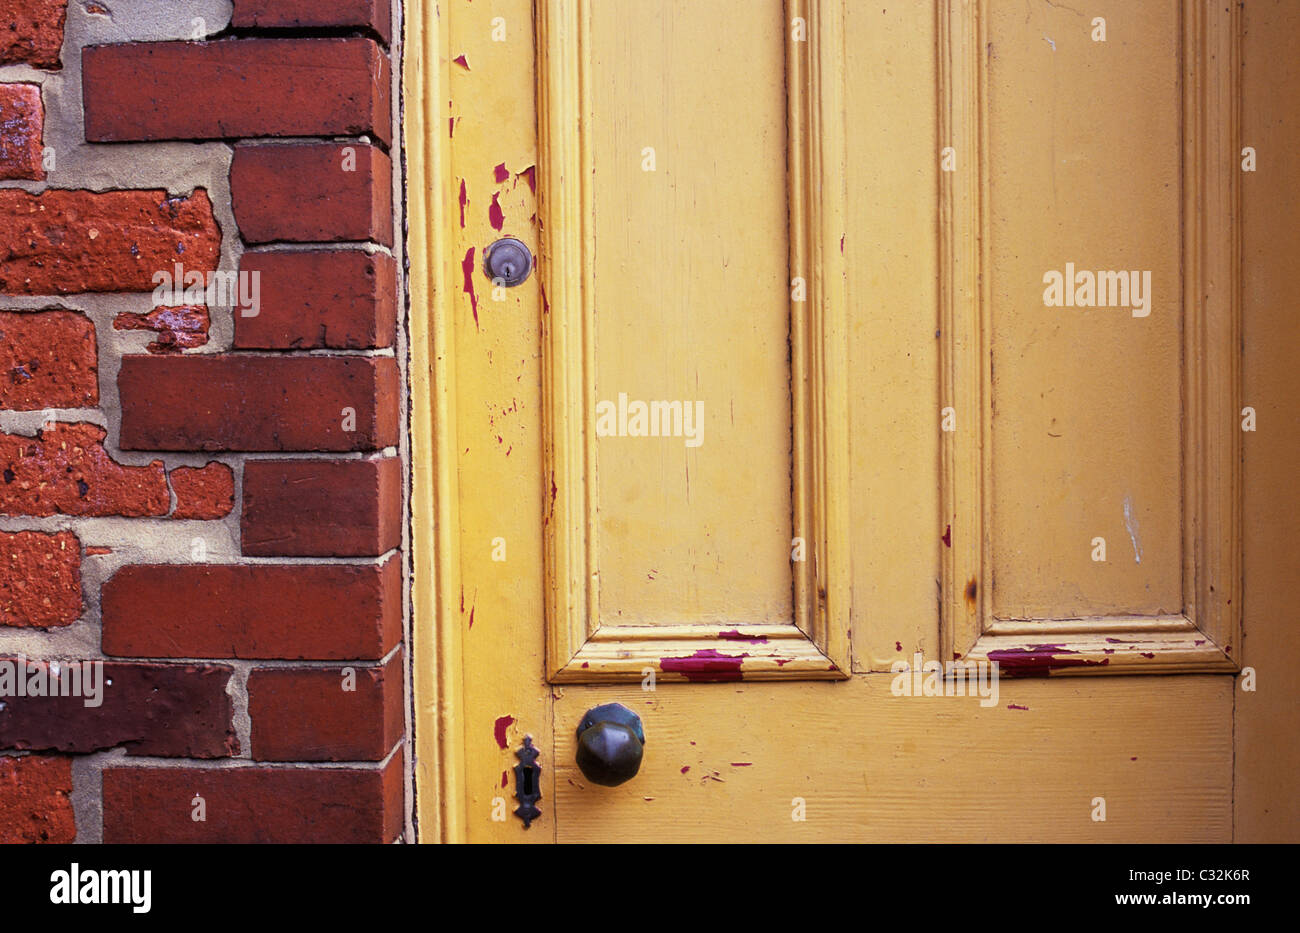 Detail of faded and chipped yellow painted front door with doorknob and locks next to hard orange brick wall Stock Photo